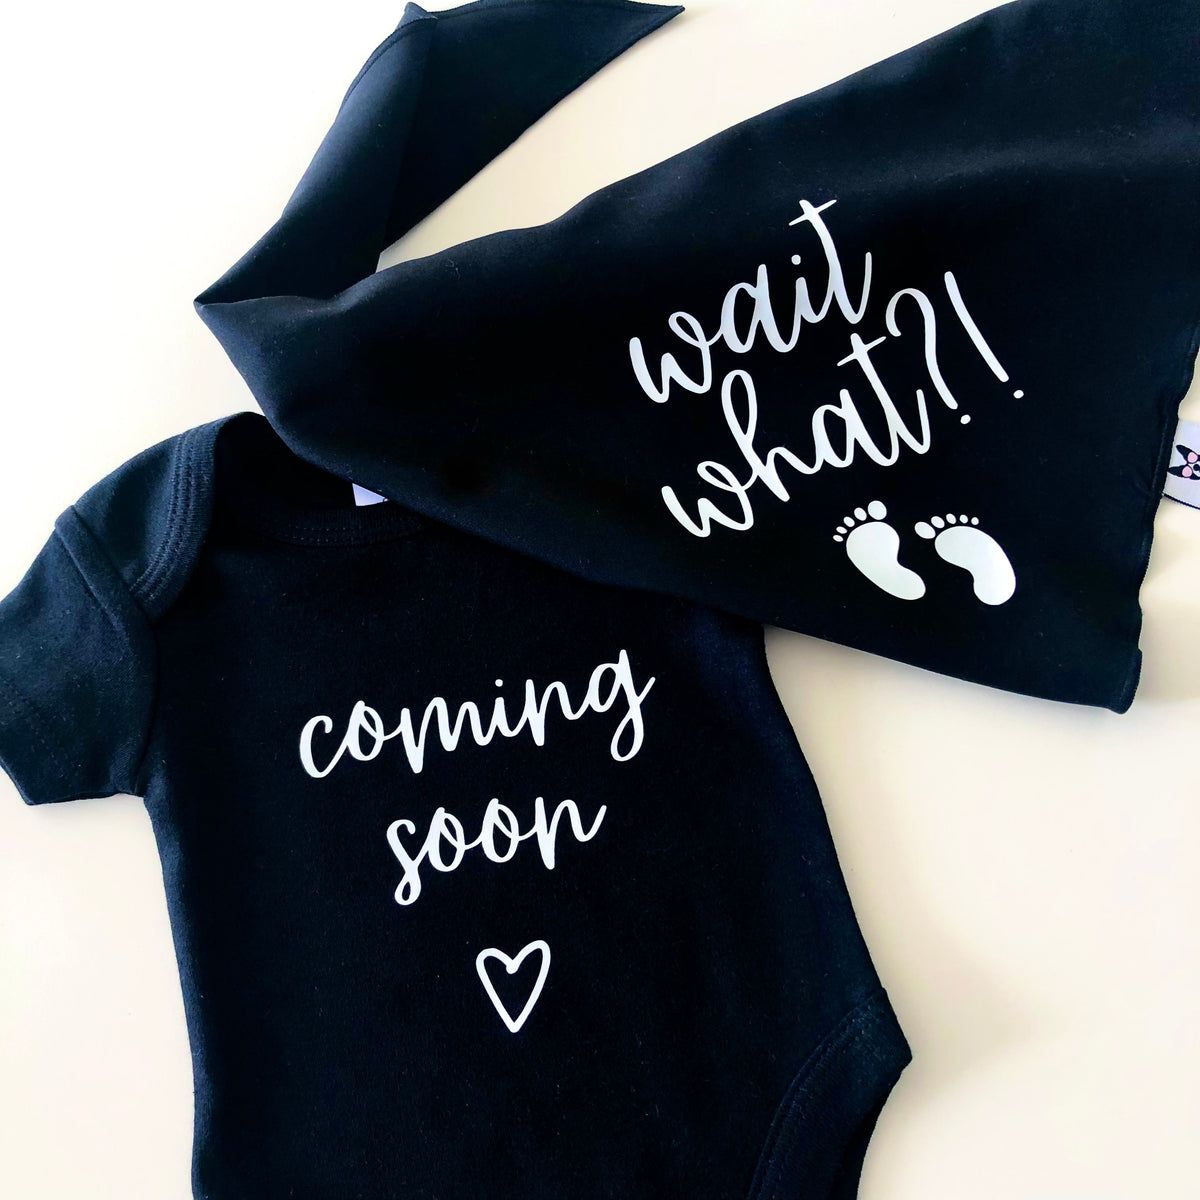 Matching Baby Onesie and Dog Bandana Pregnancy Announcement - Coming Soon